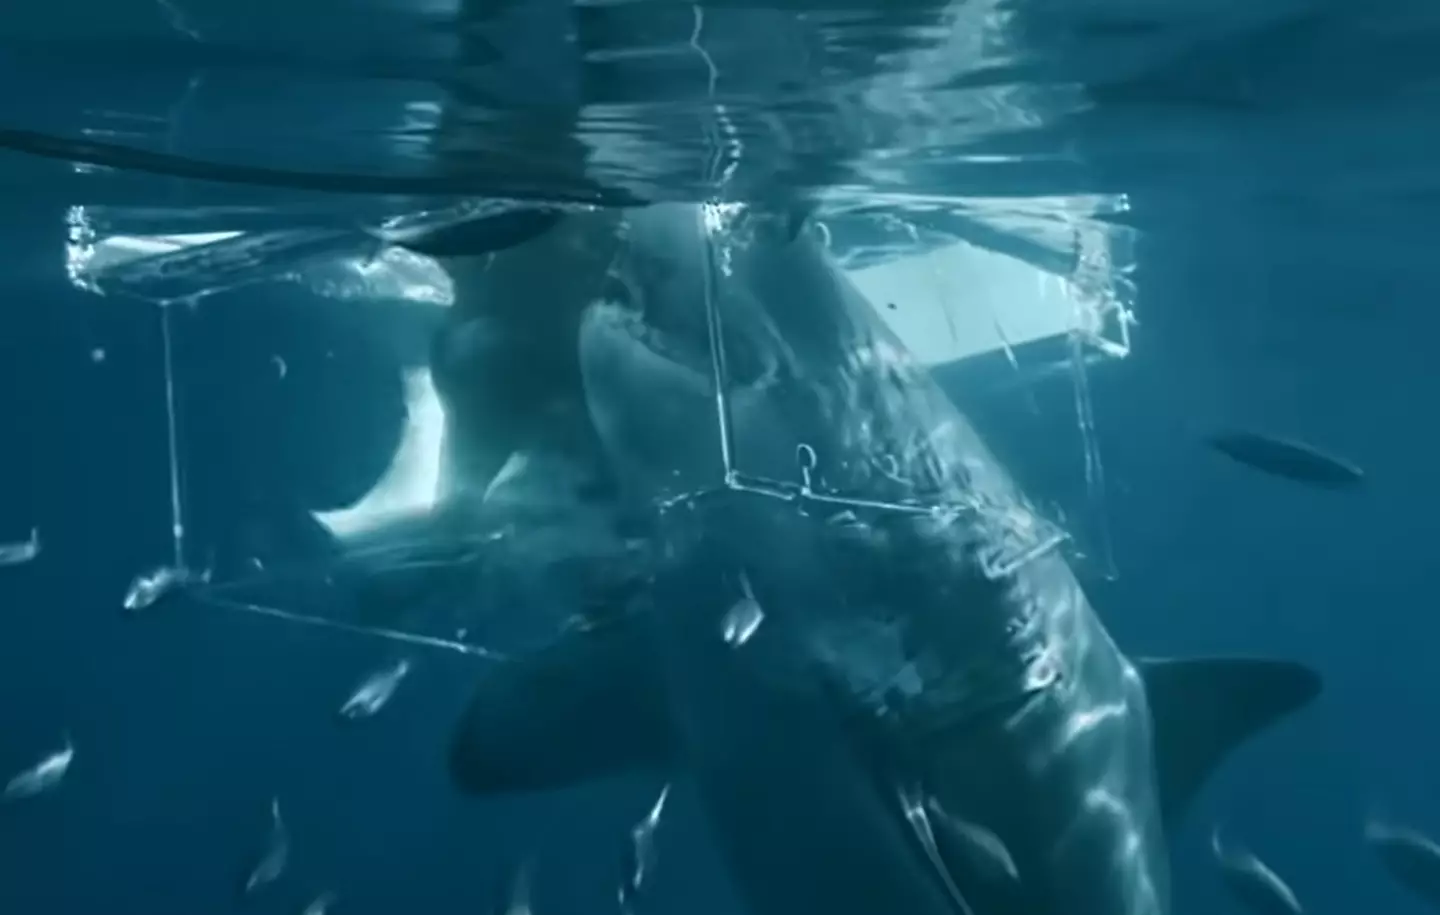 The shark smashed right through the plexiglass tank the documentary maker was in.